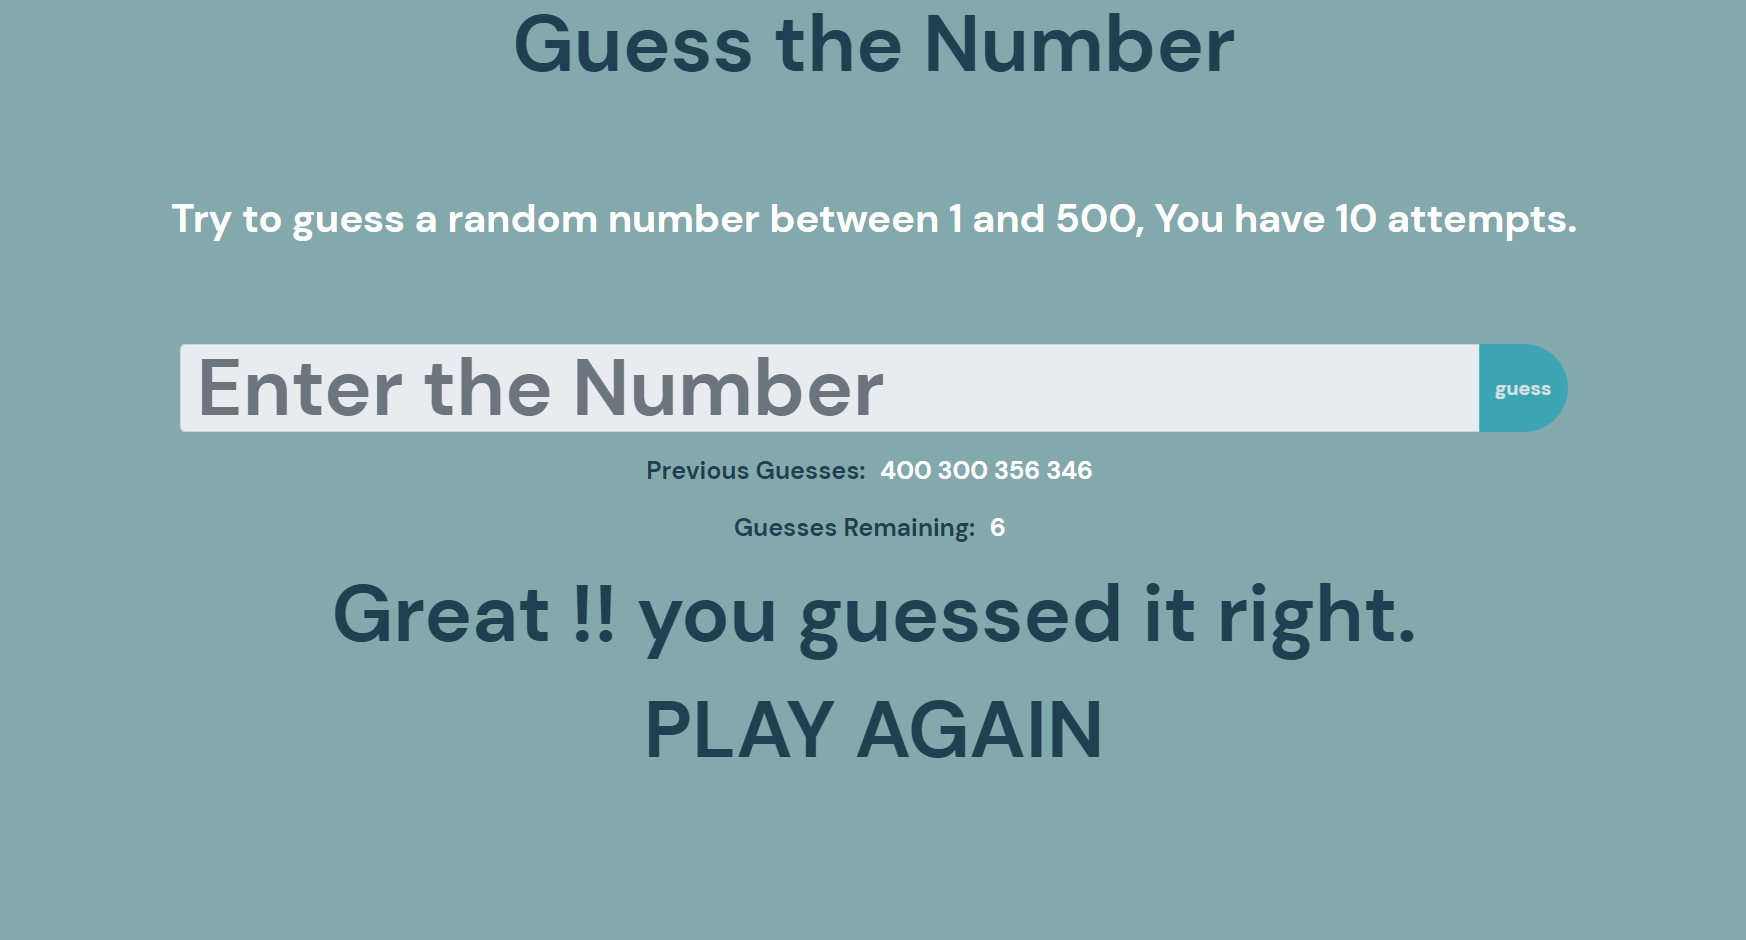 gn - GUESS THE NUMBER IN JAVASCRIPT WITH SOURCE CODE